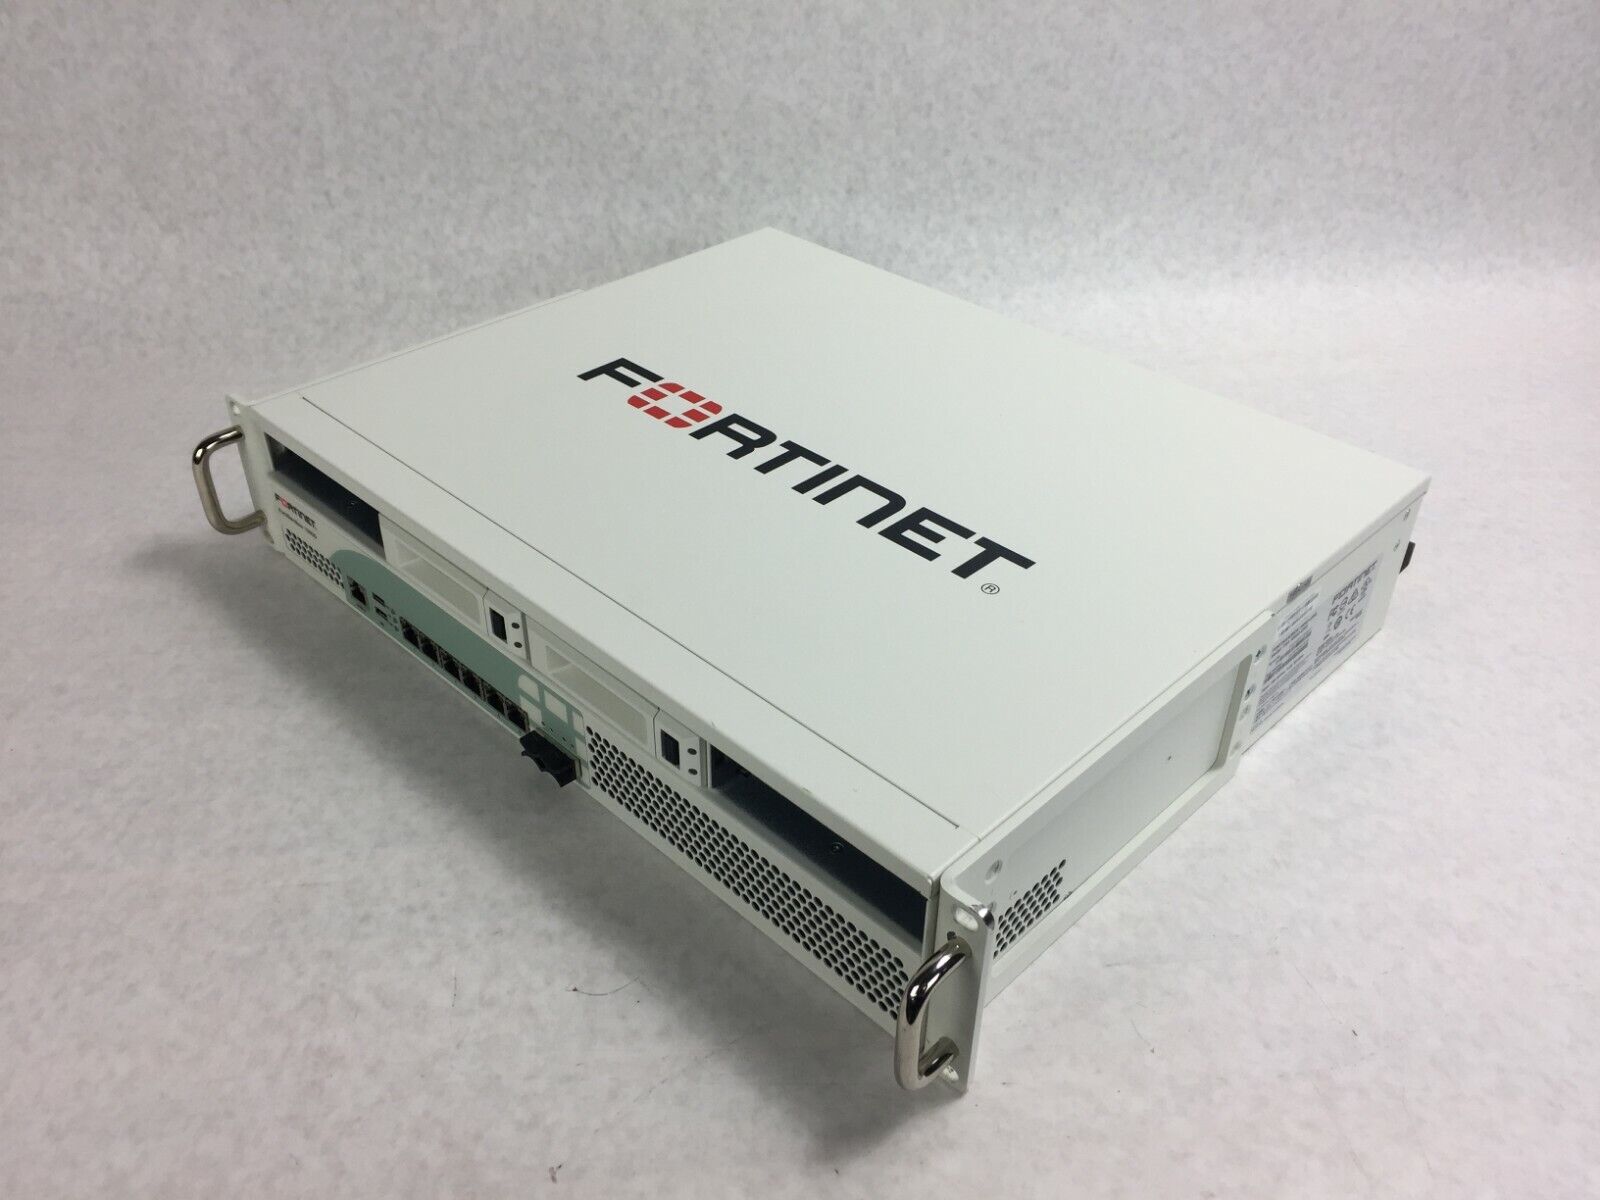 Fortinet FortiSandbox 1000D  FSA-1000D-USG  No HD  No OS  Includes 2 Power Cords